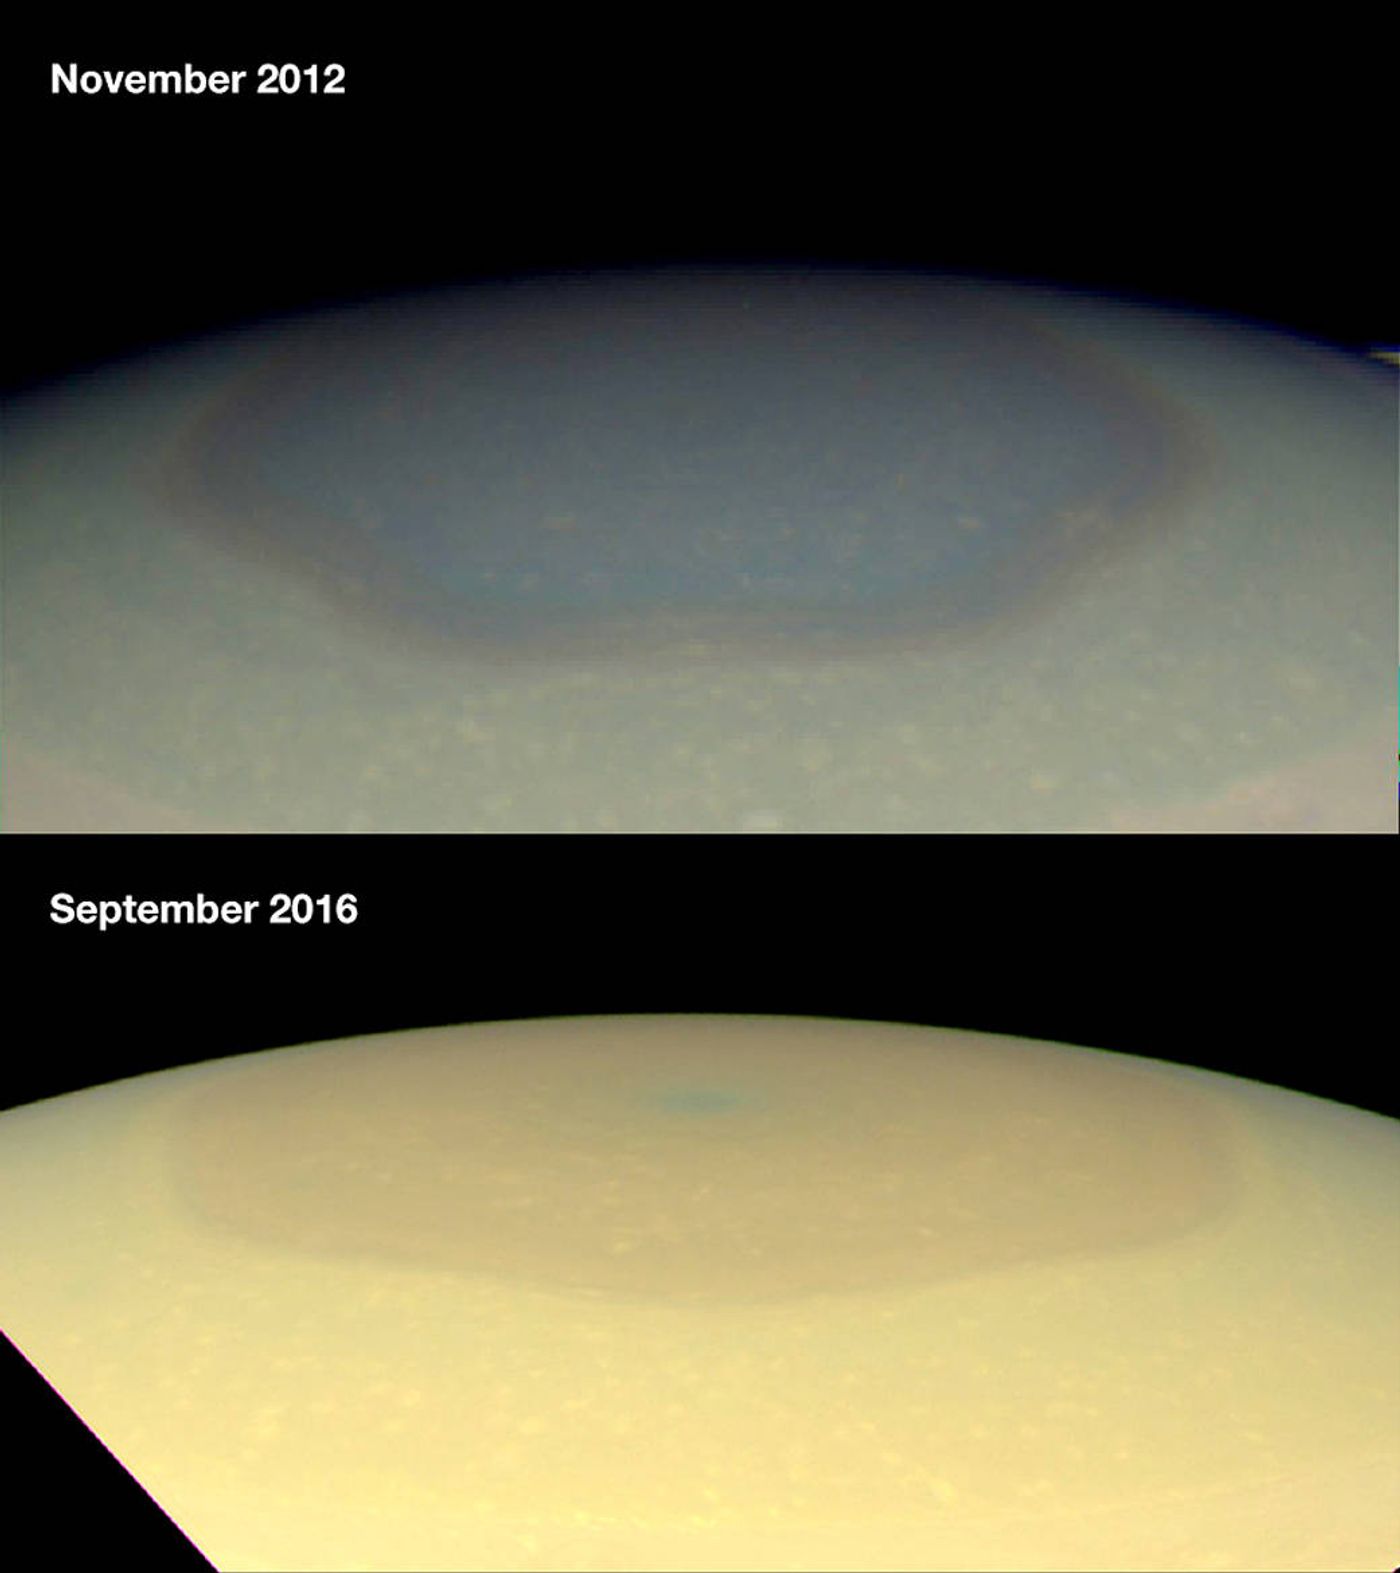 Differences in the hexagon at Saturn's North Pole between 2012 and 2016.